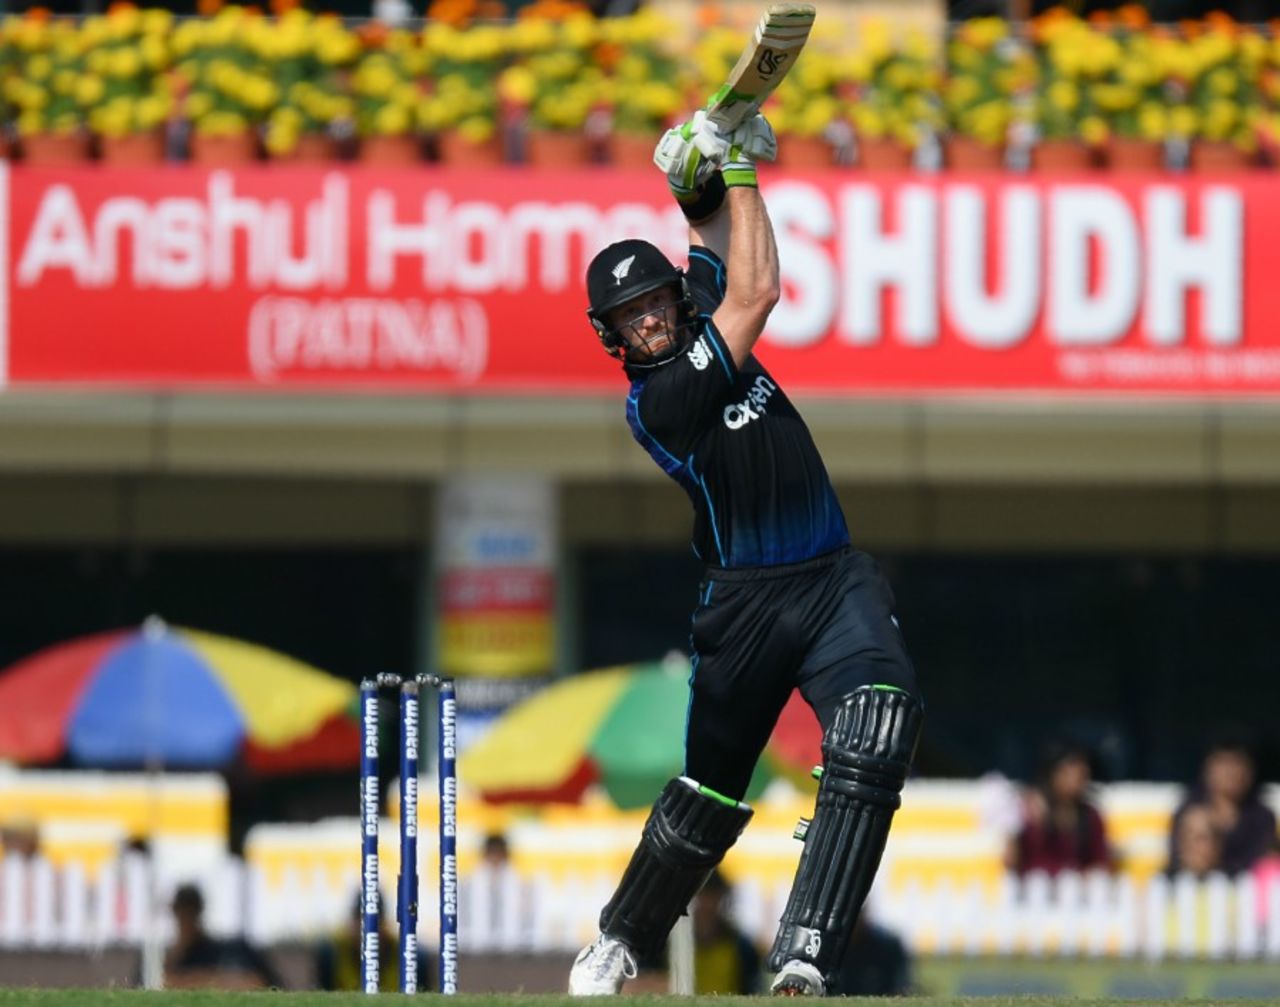 Martin Guptill made his second fifty of the tour, India v New Zealand, 4th ODI, Ranchi, October 26, 2016